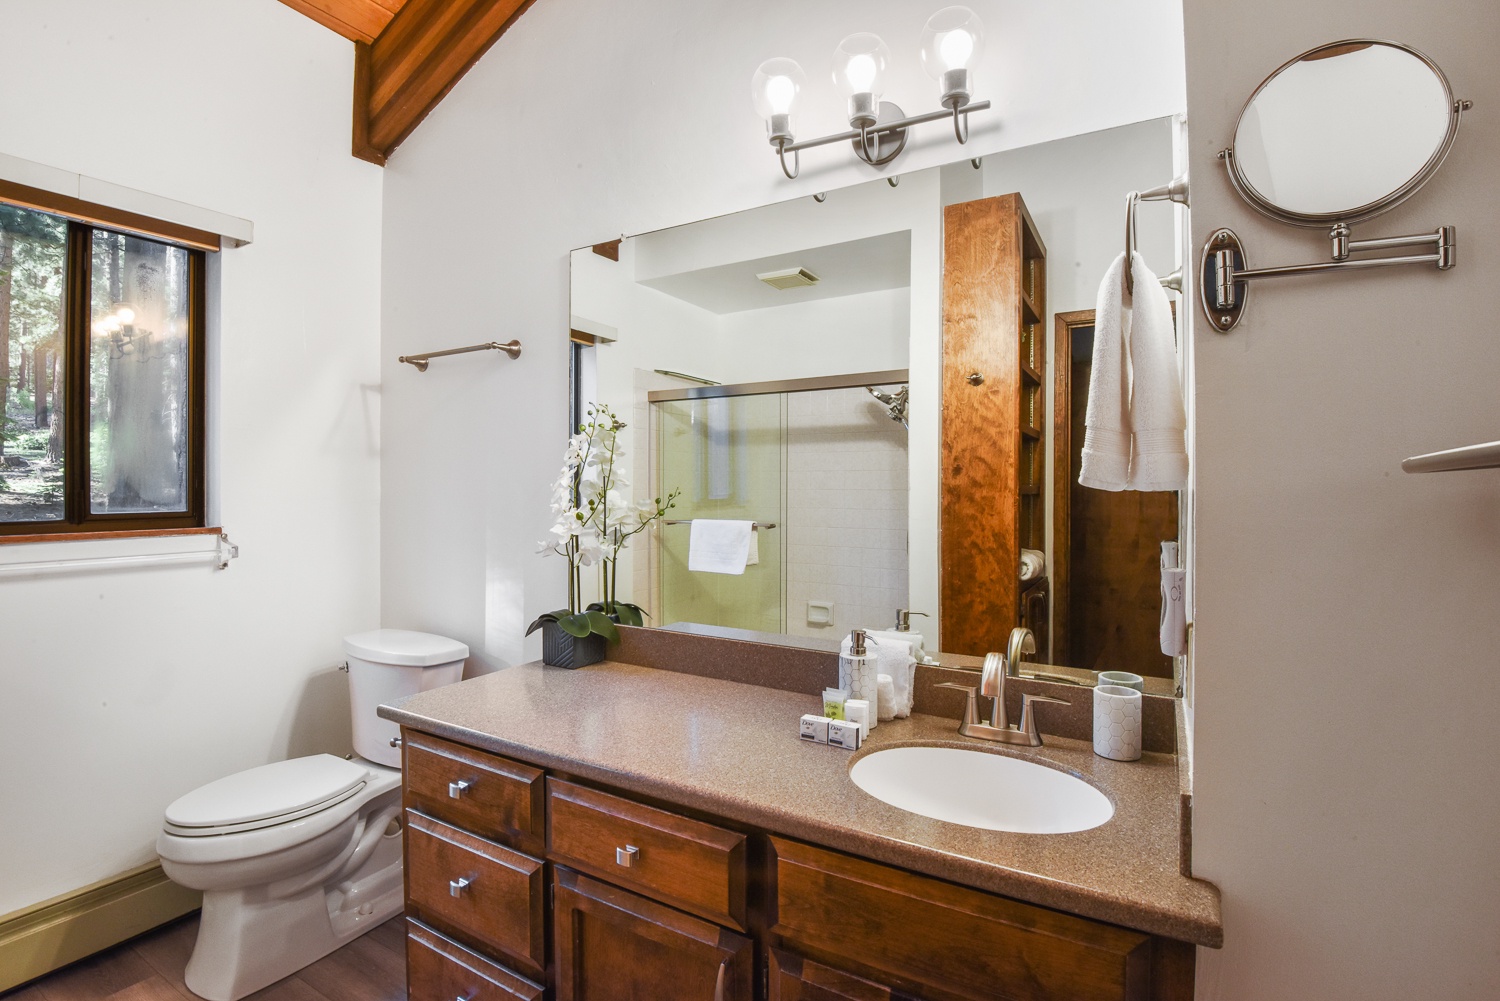 The 3rd floor full bathroom offers a large single vanity & shower/tub combo